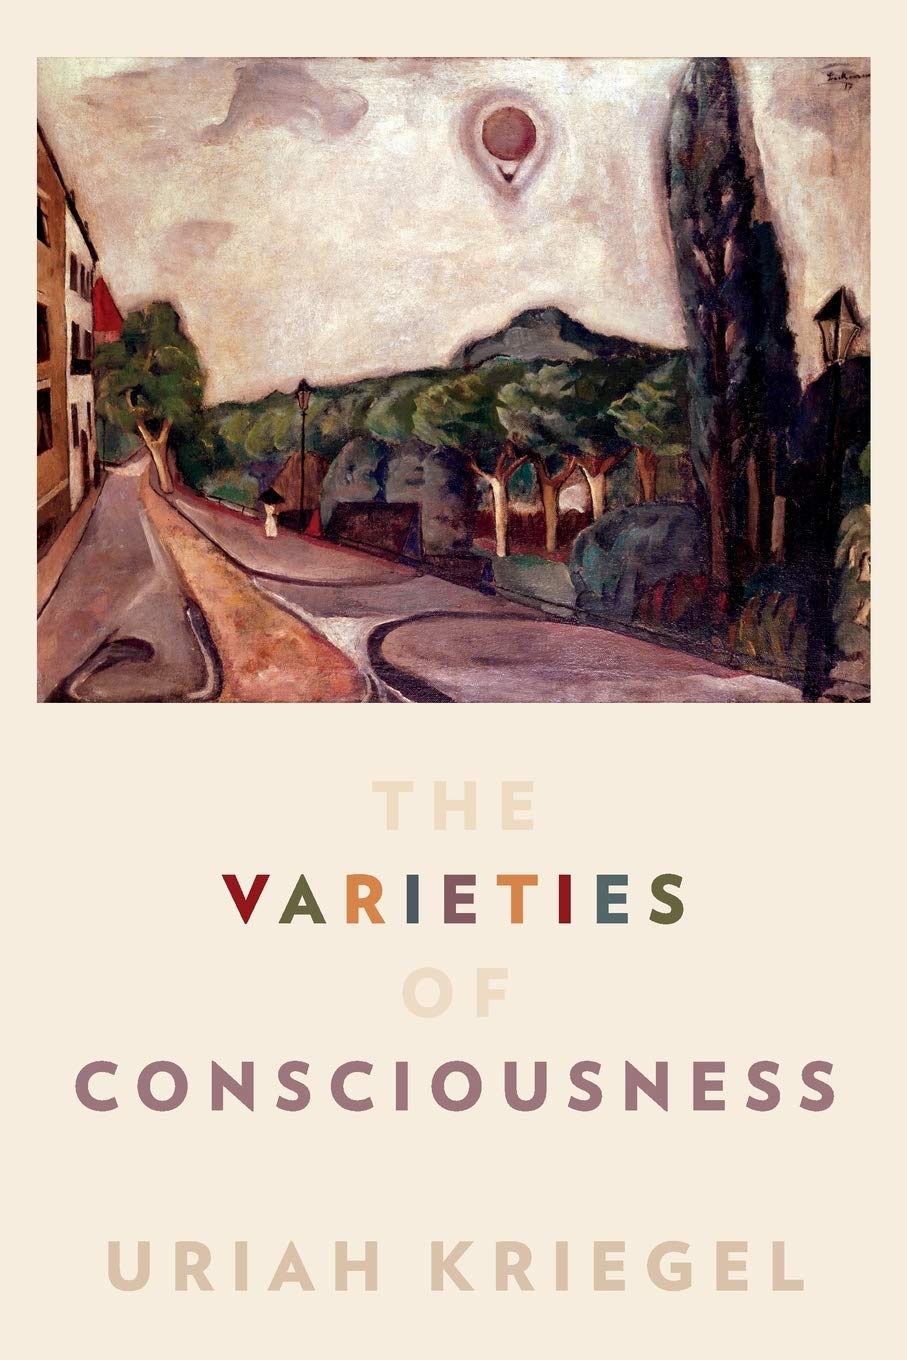 The Varieties of Consciousness